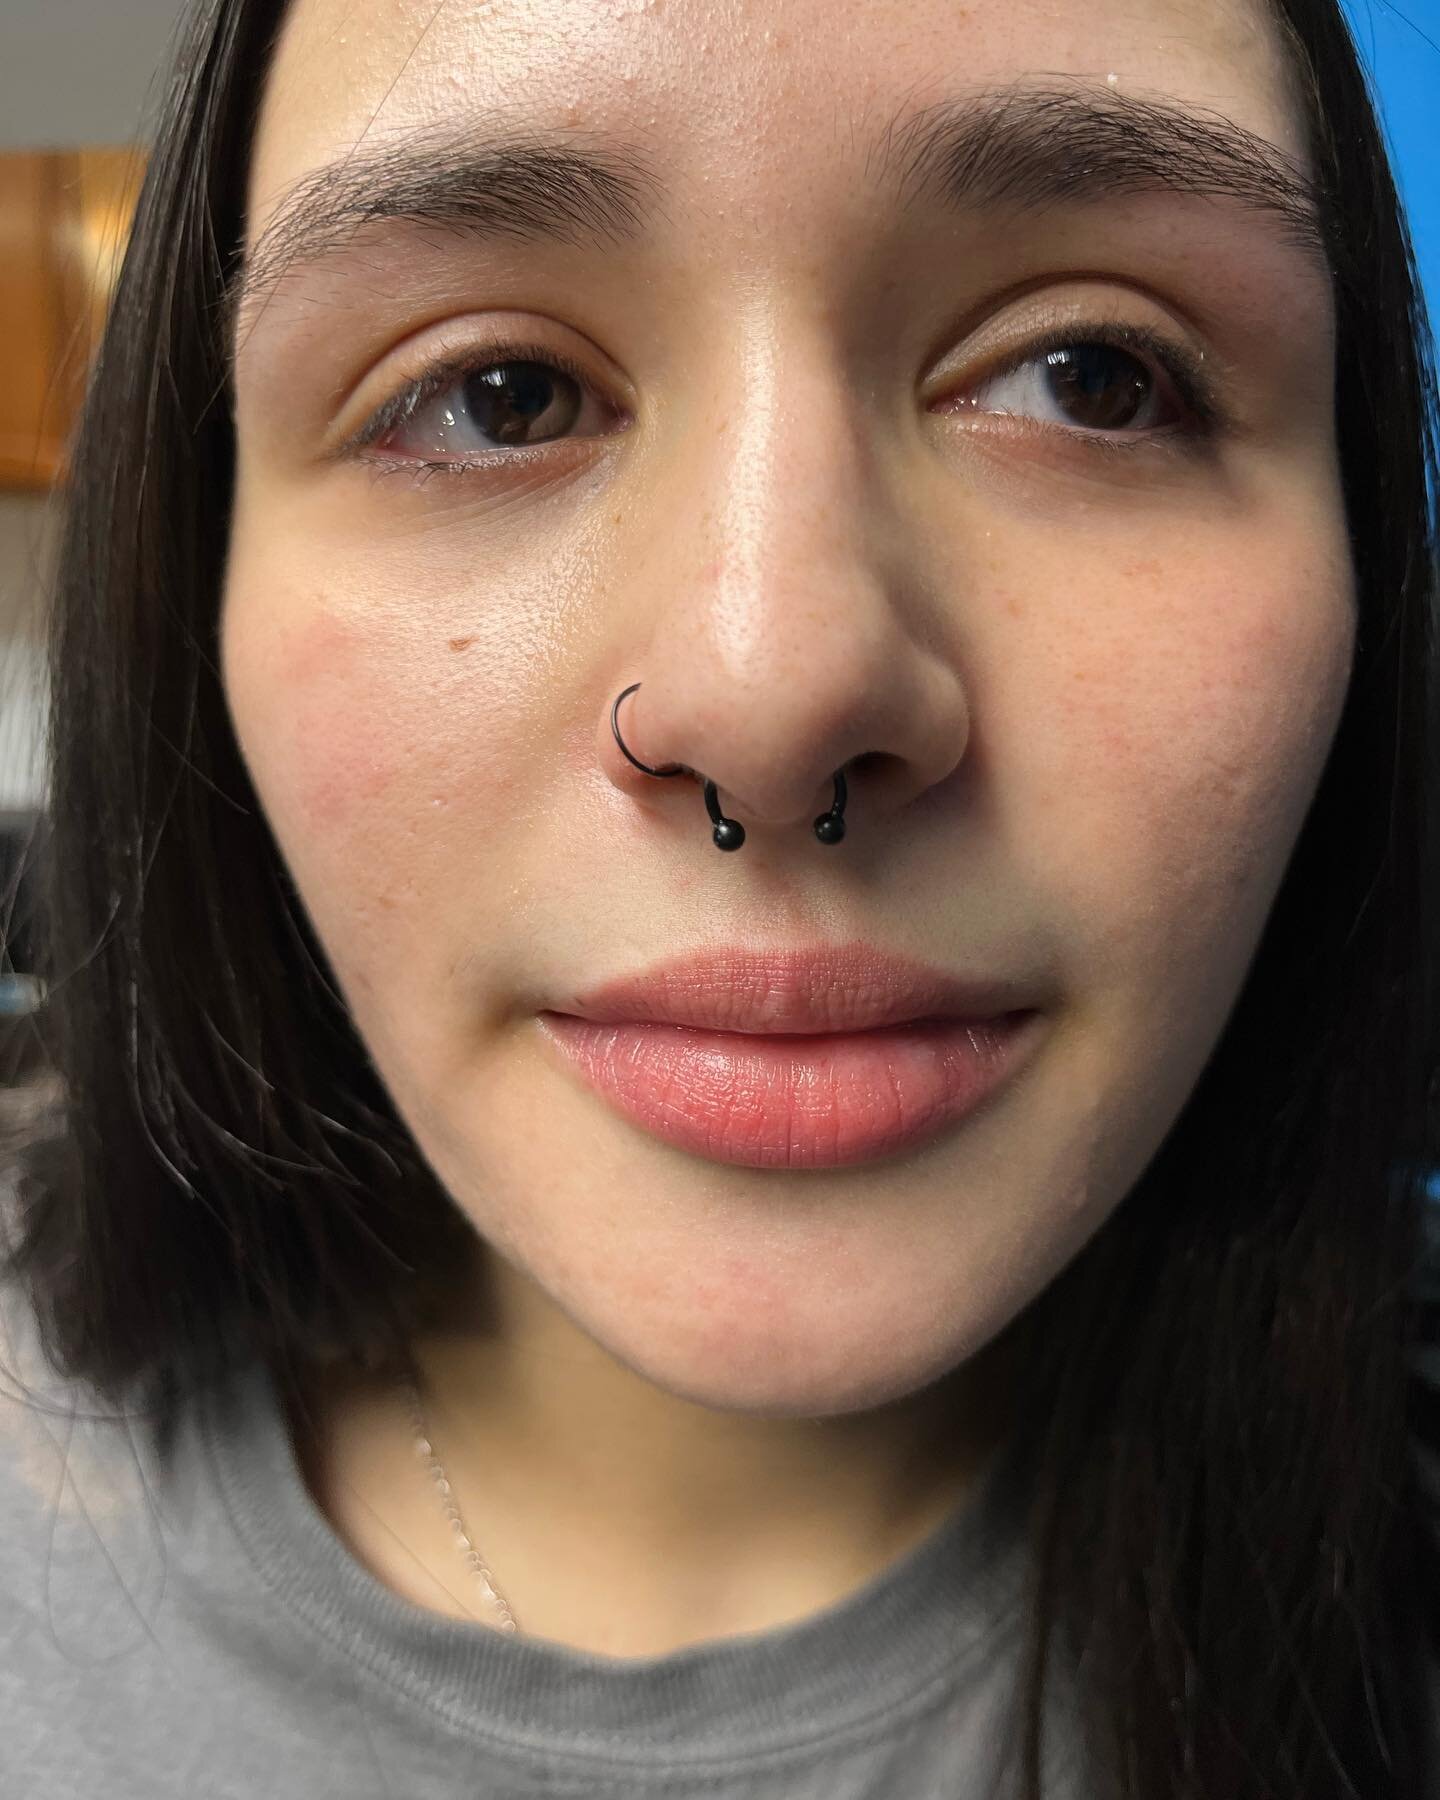 Septum piercing, super concealable if you want to only show it off sometimes #flipitup #pierclings #piercerlife #septum @lolastattoos